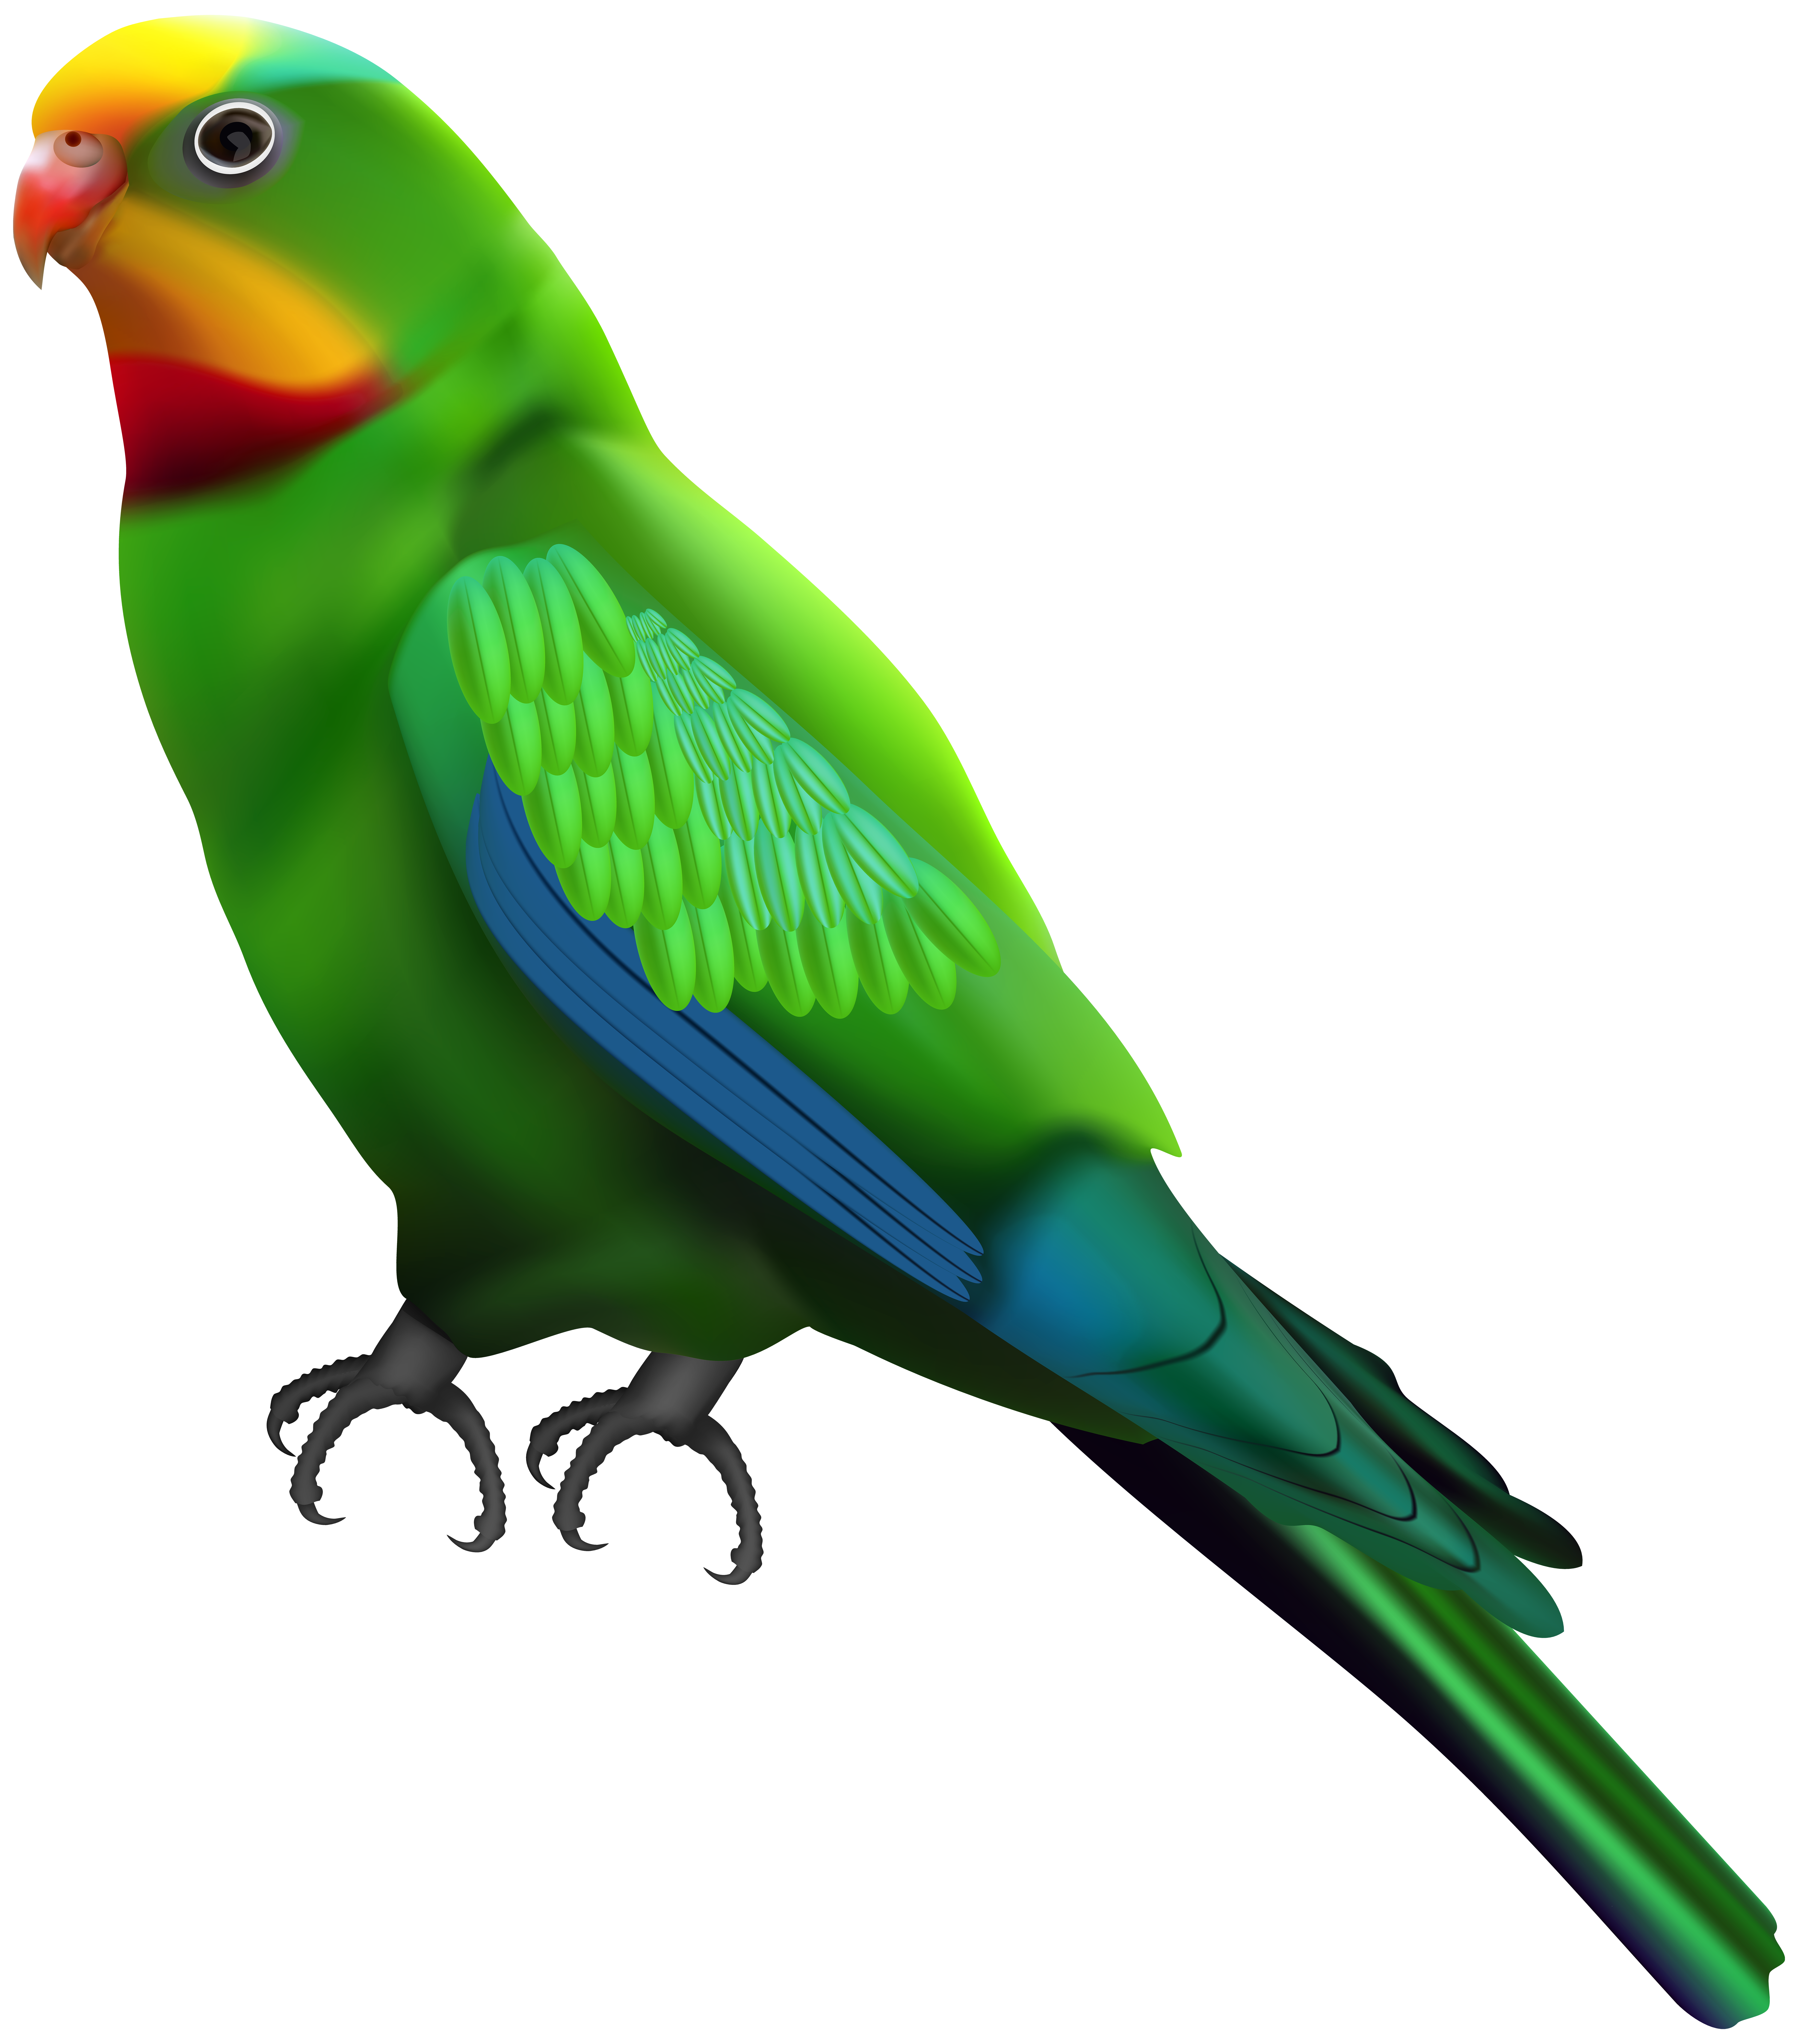 Green Parrot Transparent Clip Art Image | Gallery Yopriceville ...